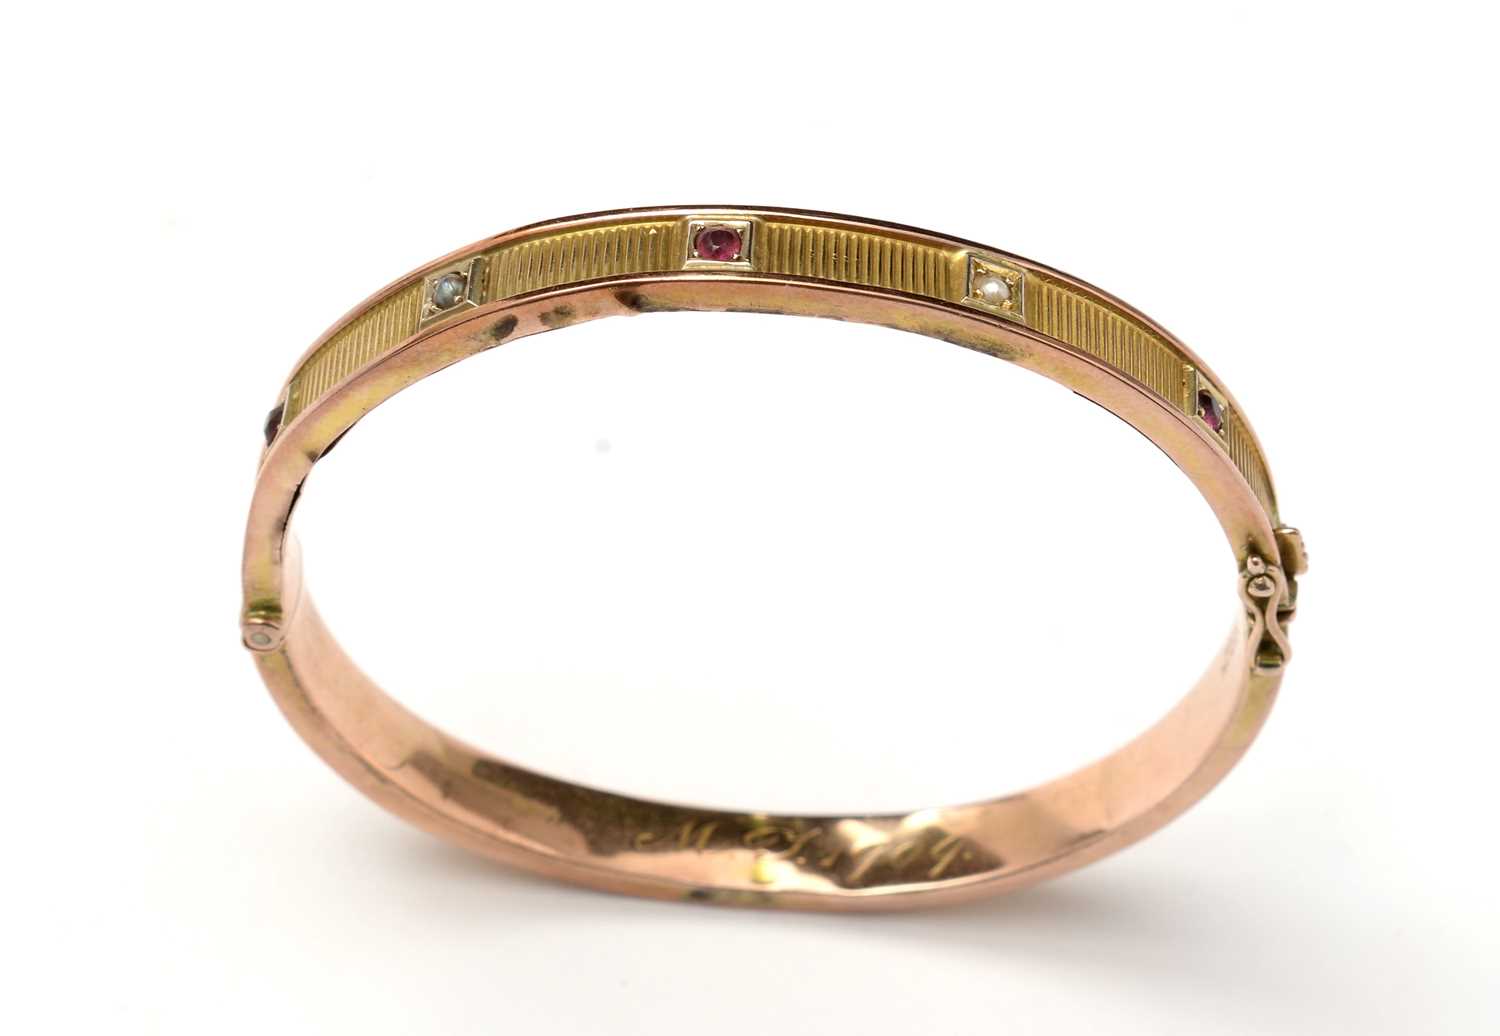 Lot 89 - An Edwardian 9ct gold, garnet, and pearl bangle of Etruscan influence.